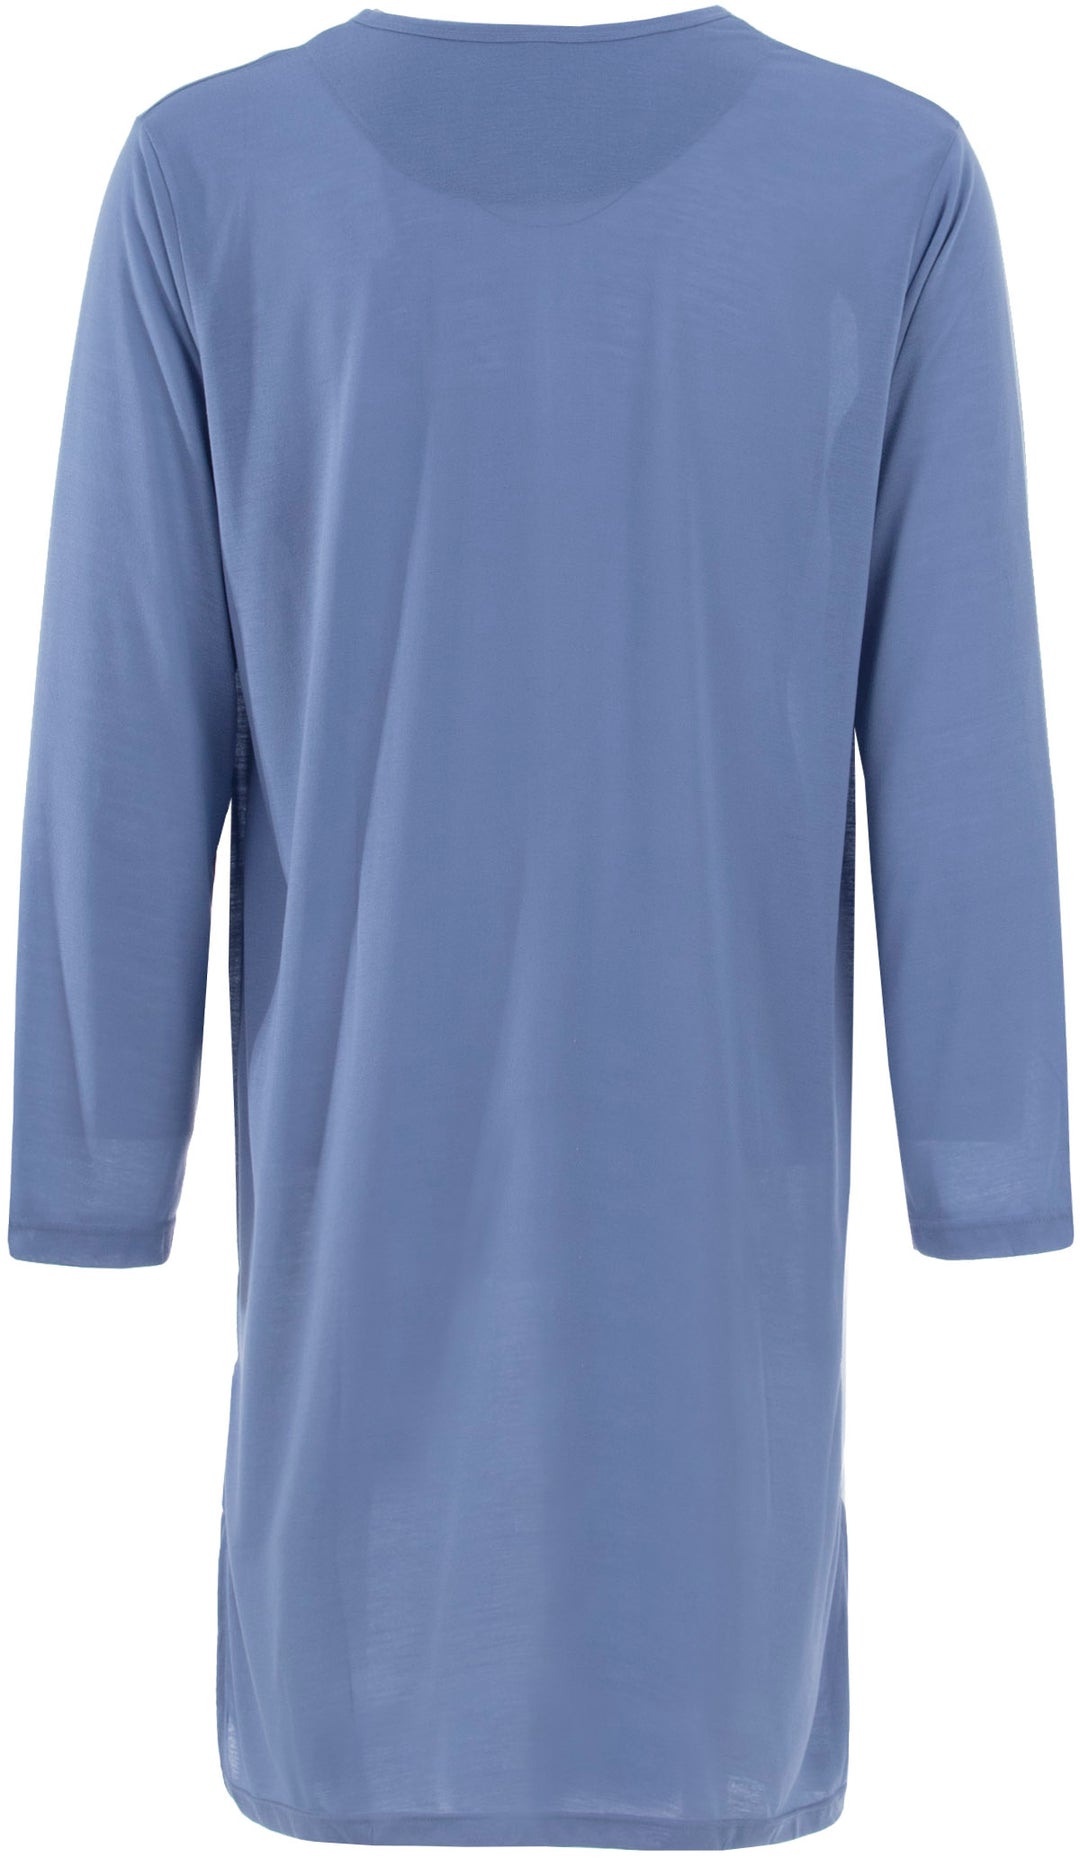 Long-sleeved nightgown - Uni with 3-button placket